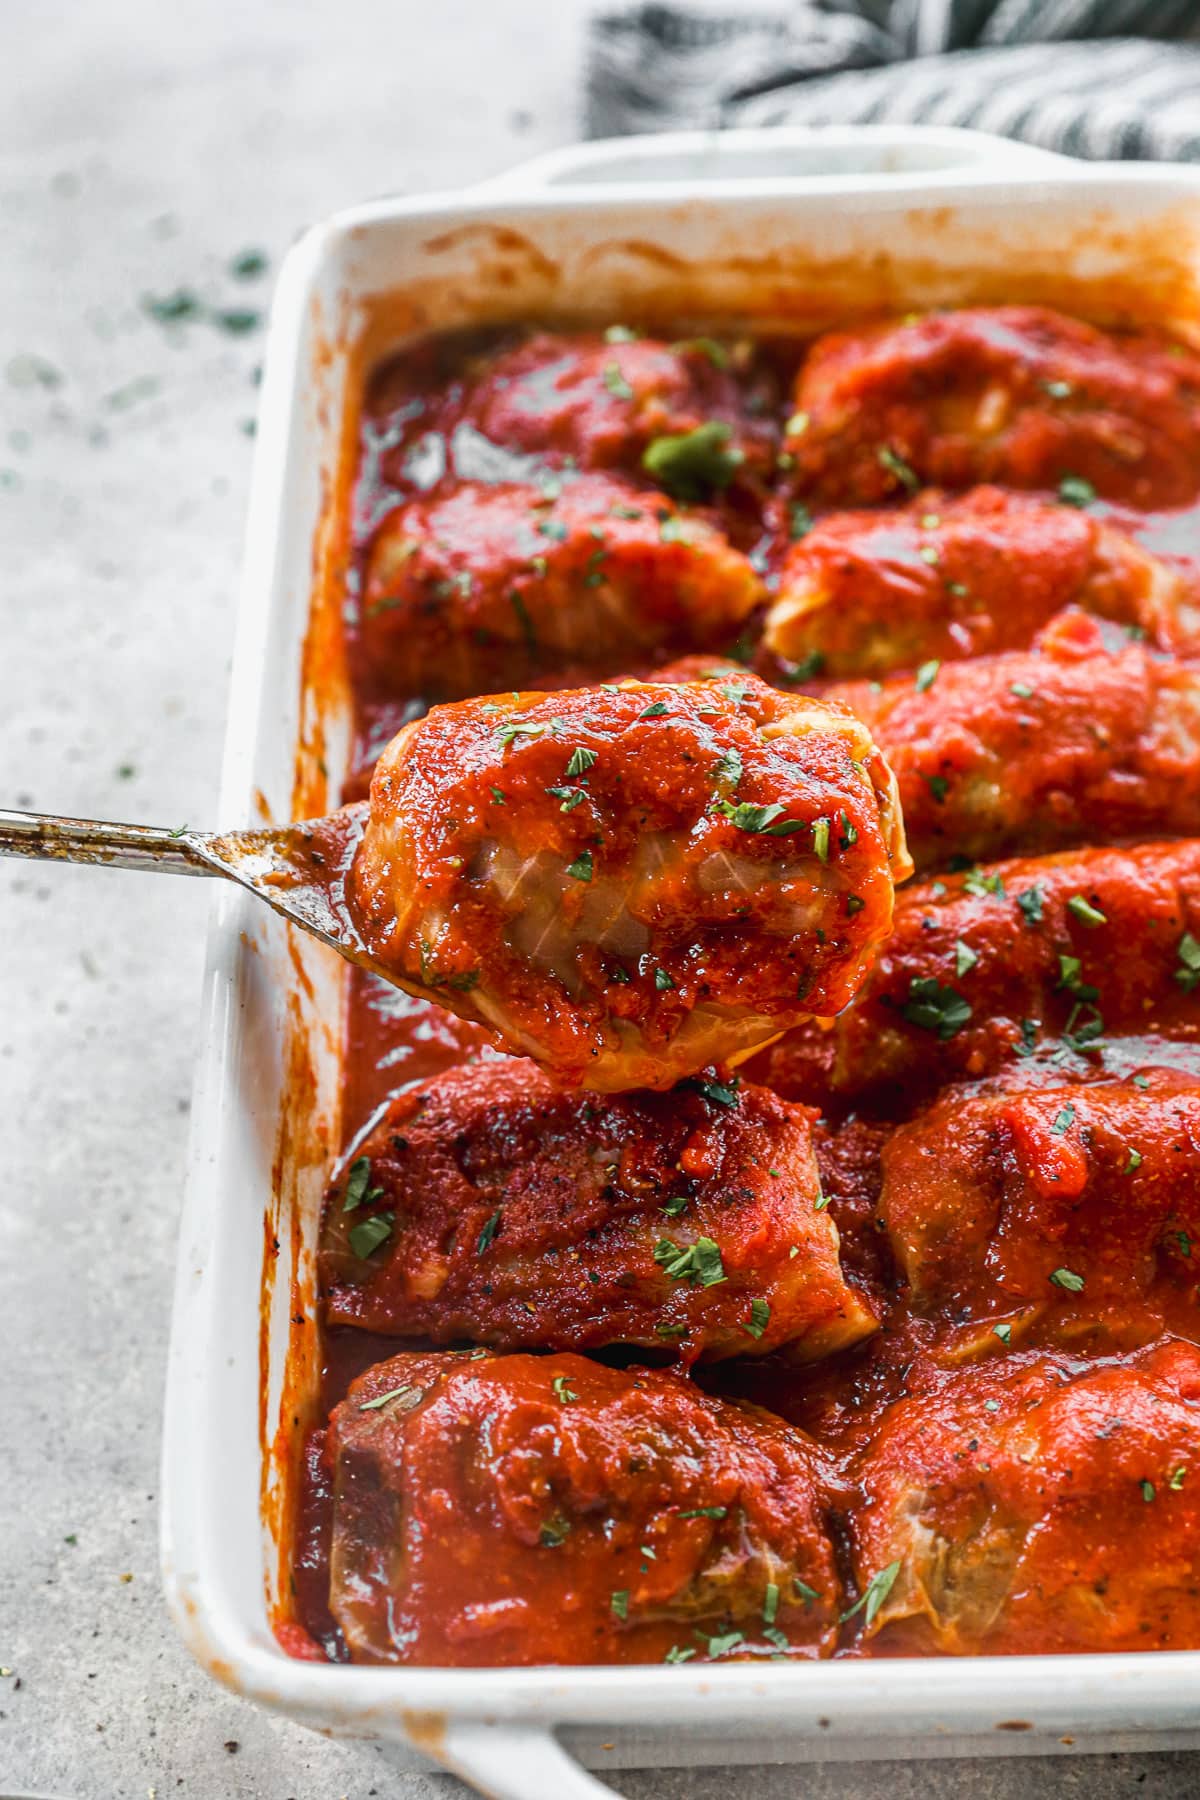 The Comforting Dish Loved Worldwide: Cabbage Rolls